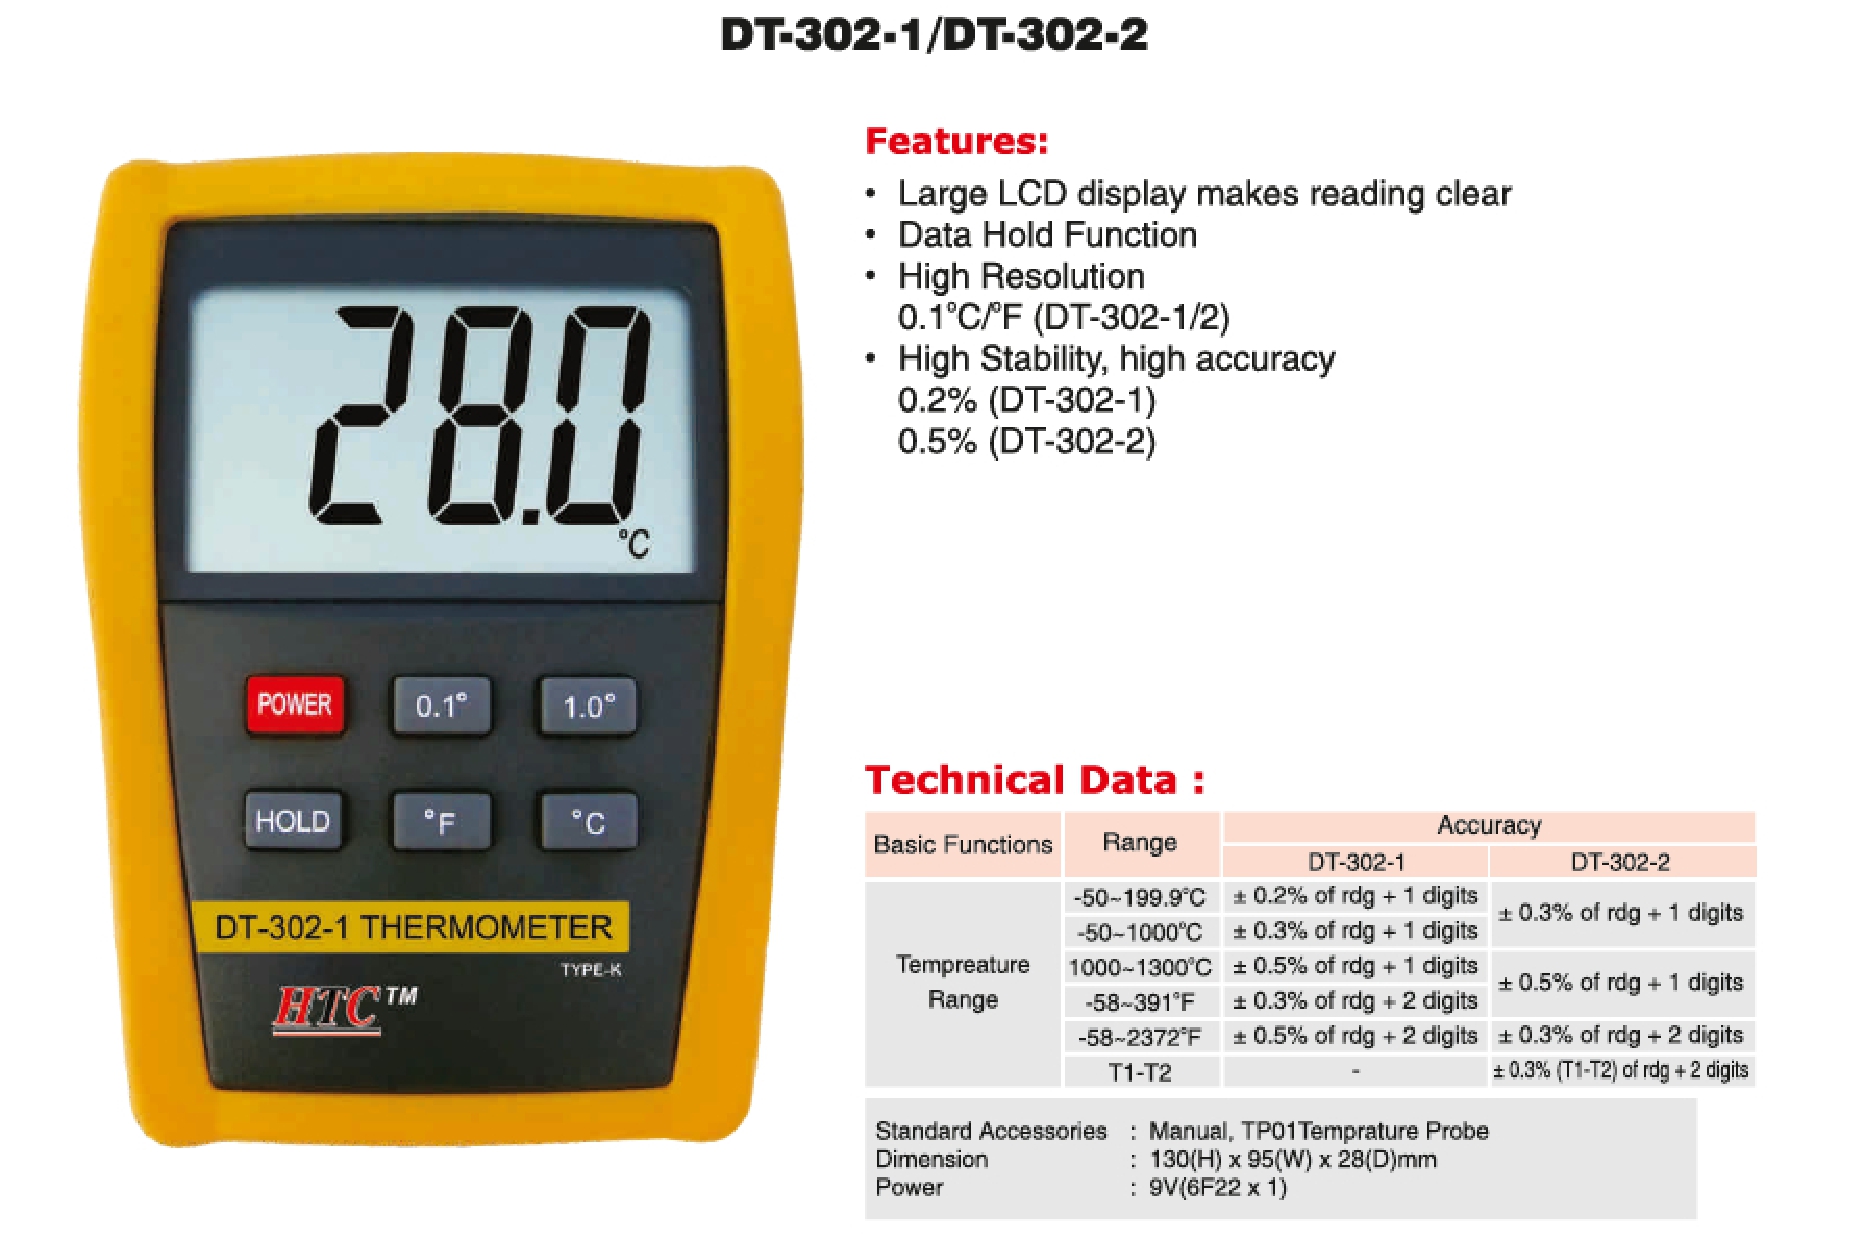 HTC DT-302-1 Digital Thermometer (Single Input)